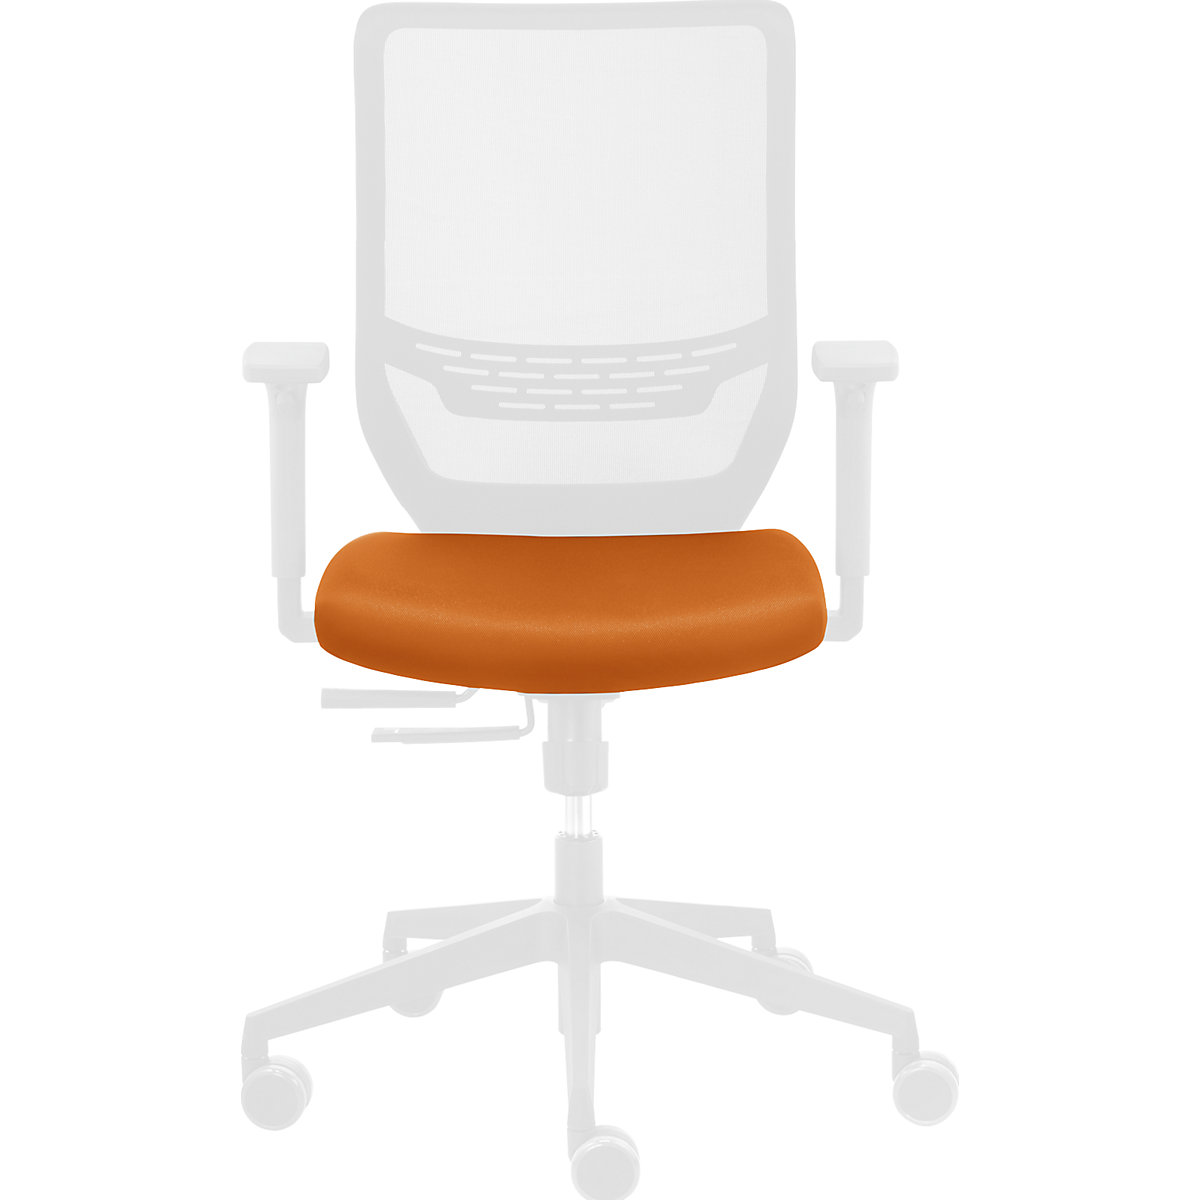 TO-SYNC seat cover – TrendOffice, for office swivel chair, orange-4